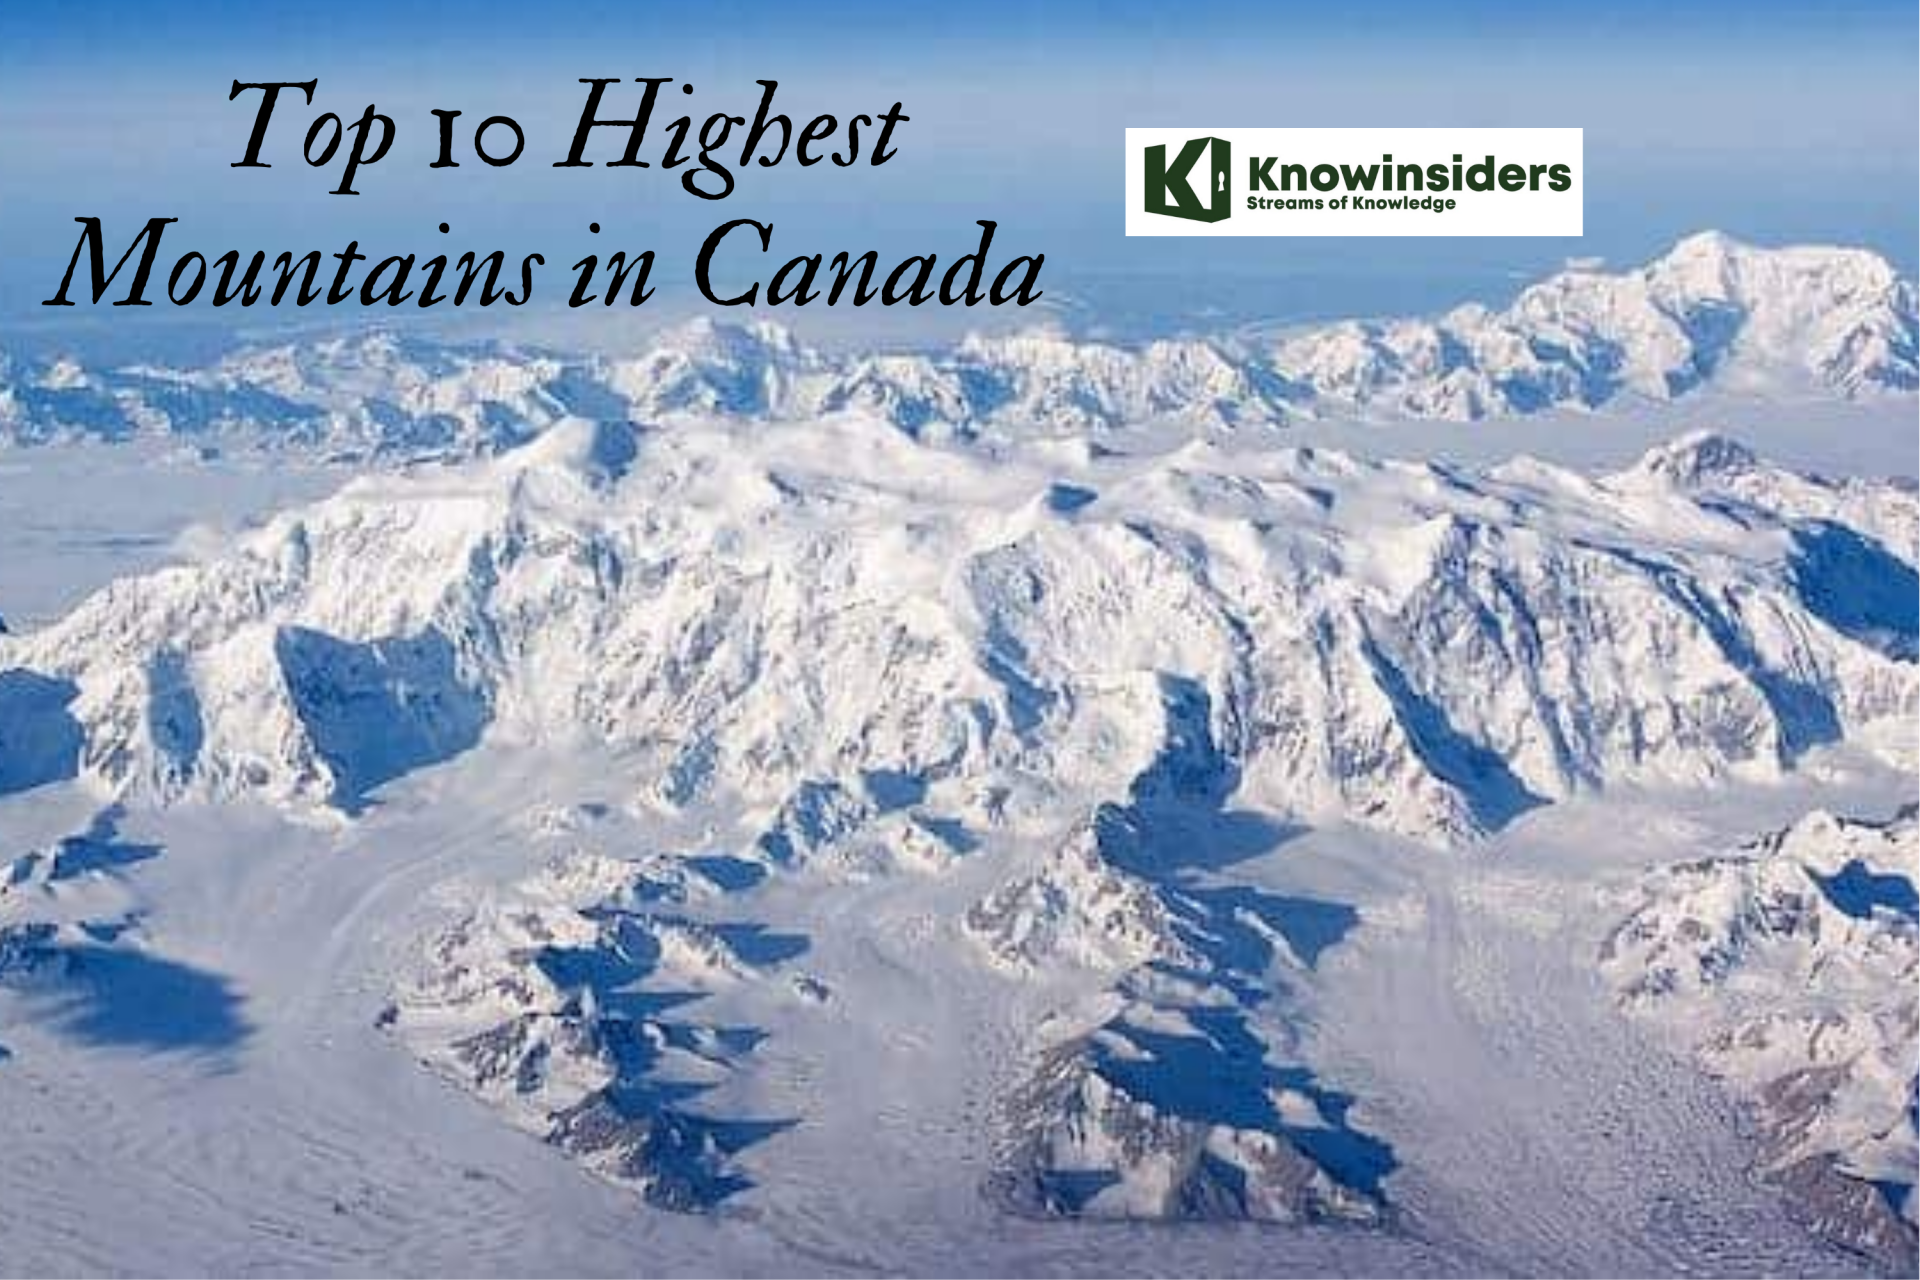 Top 10 Highest Mountains in Canada